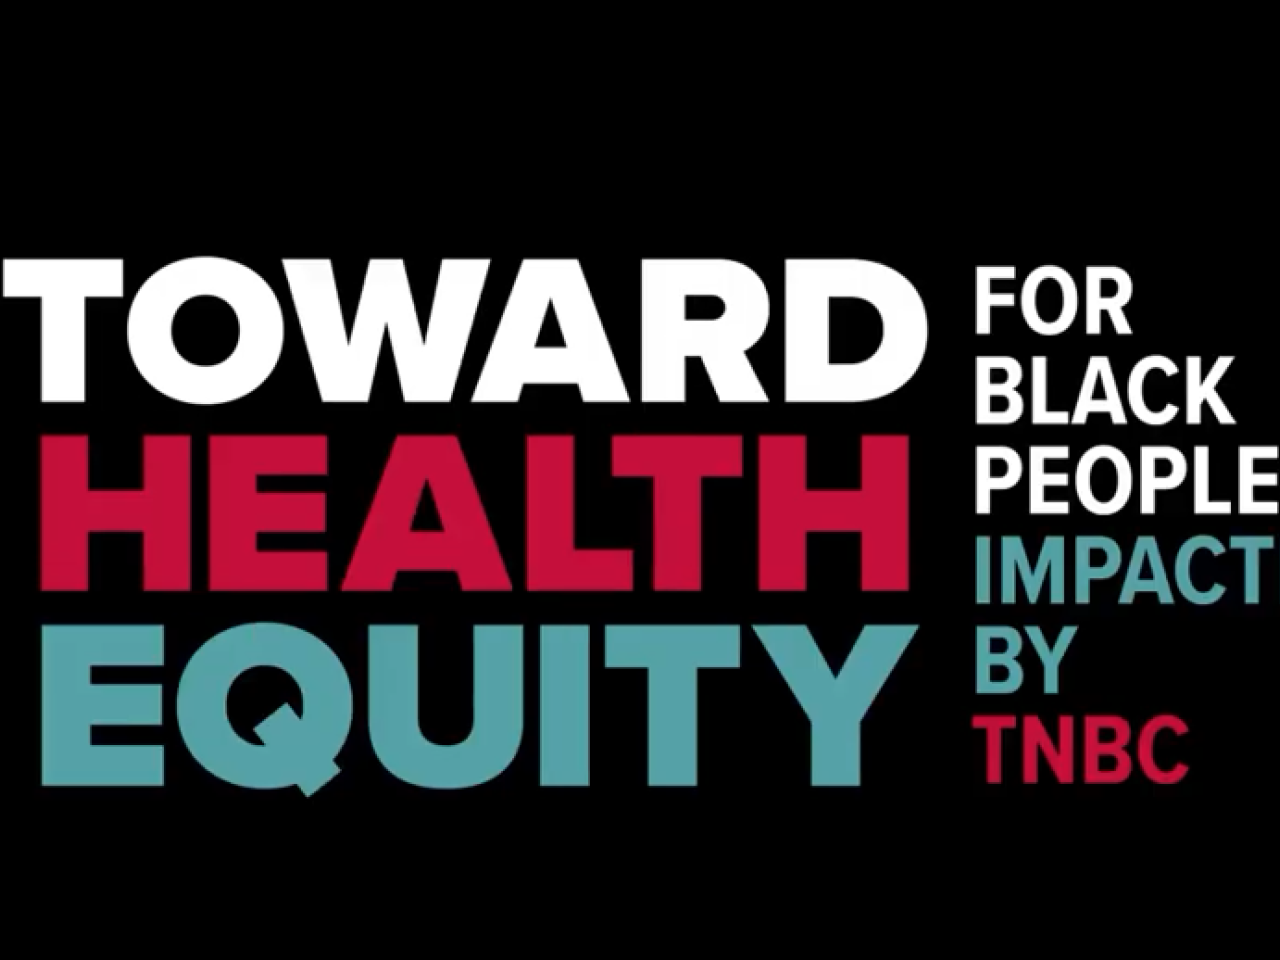 Text: Toward Health Equity for Black People Impacted by TNBC